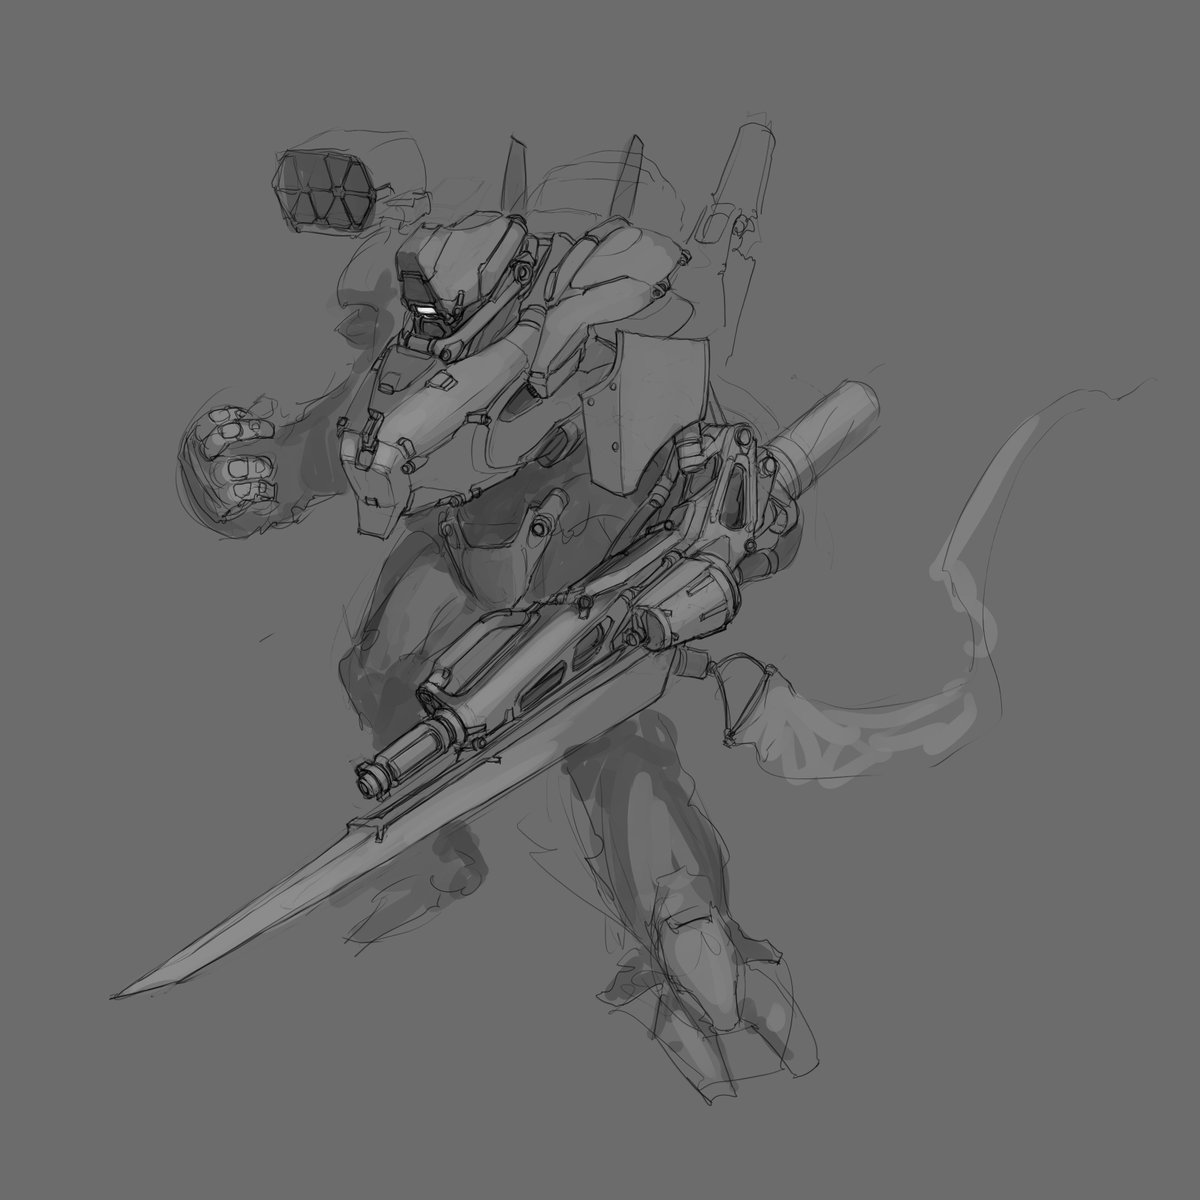 「mecha sketch 」|Mike Doscherのイラスト